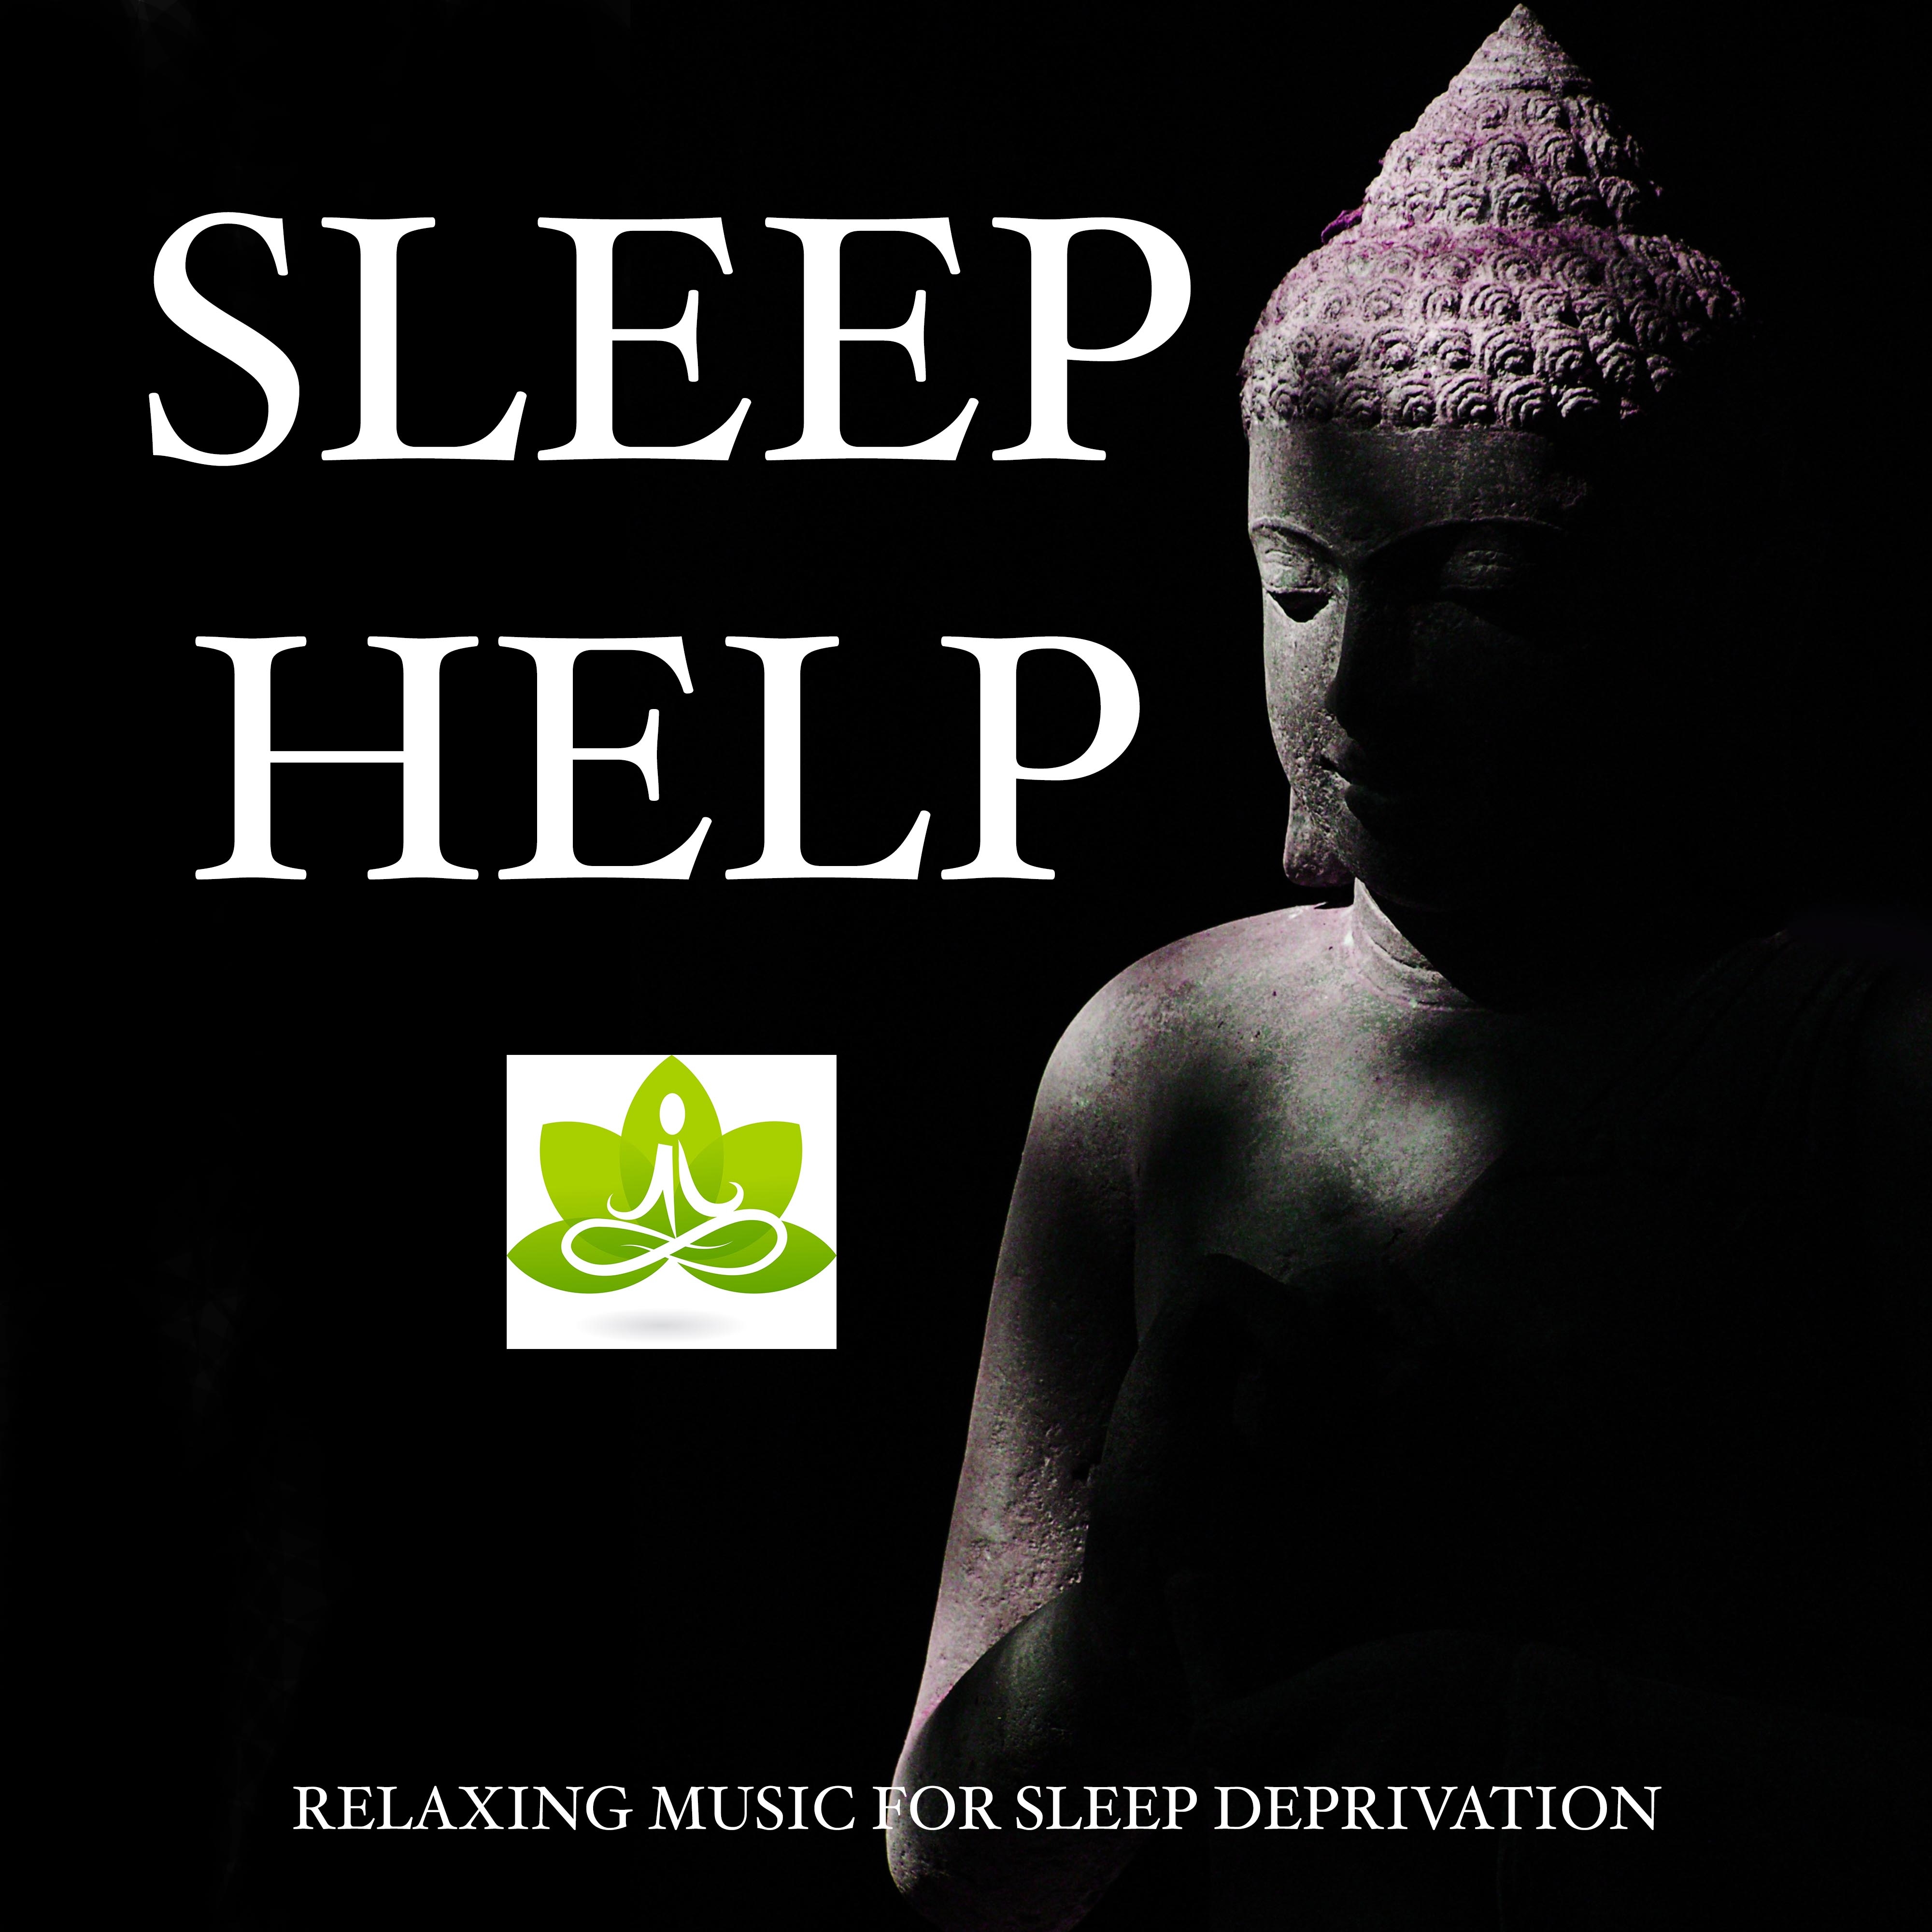 Sleep Help - A Specially Curated Playlist with Relaxing Music for Sleep Deprivation, Sleep Disorders and Insomnia to Combat Stress and Anxiety and Get a Good Night's Sleep